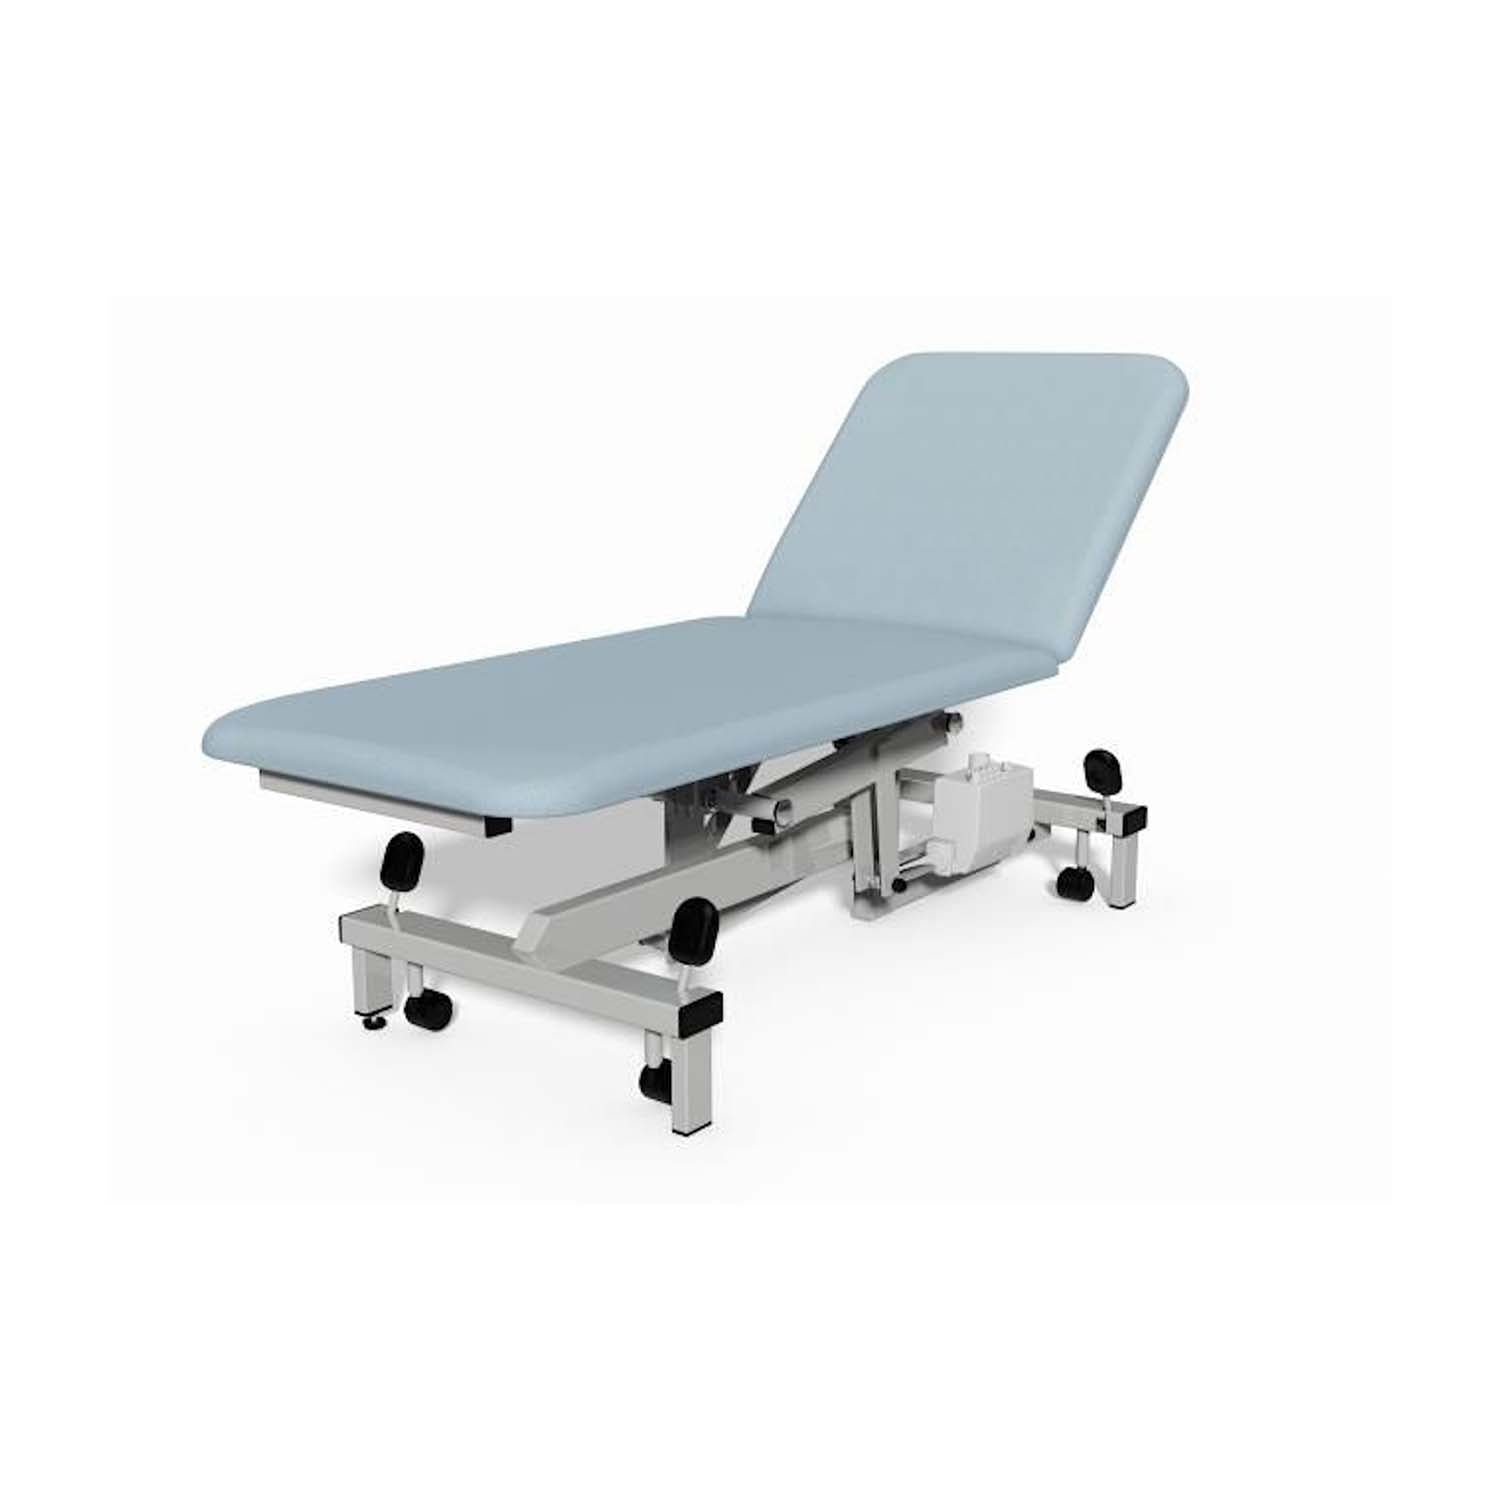 Plinth 2000 Model 502 Examination Couch | Electric | Cool Blue